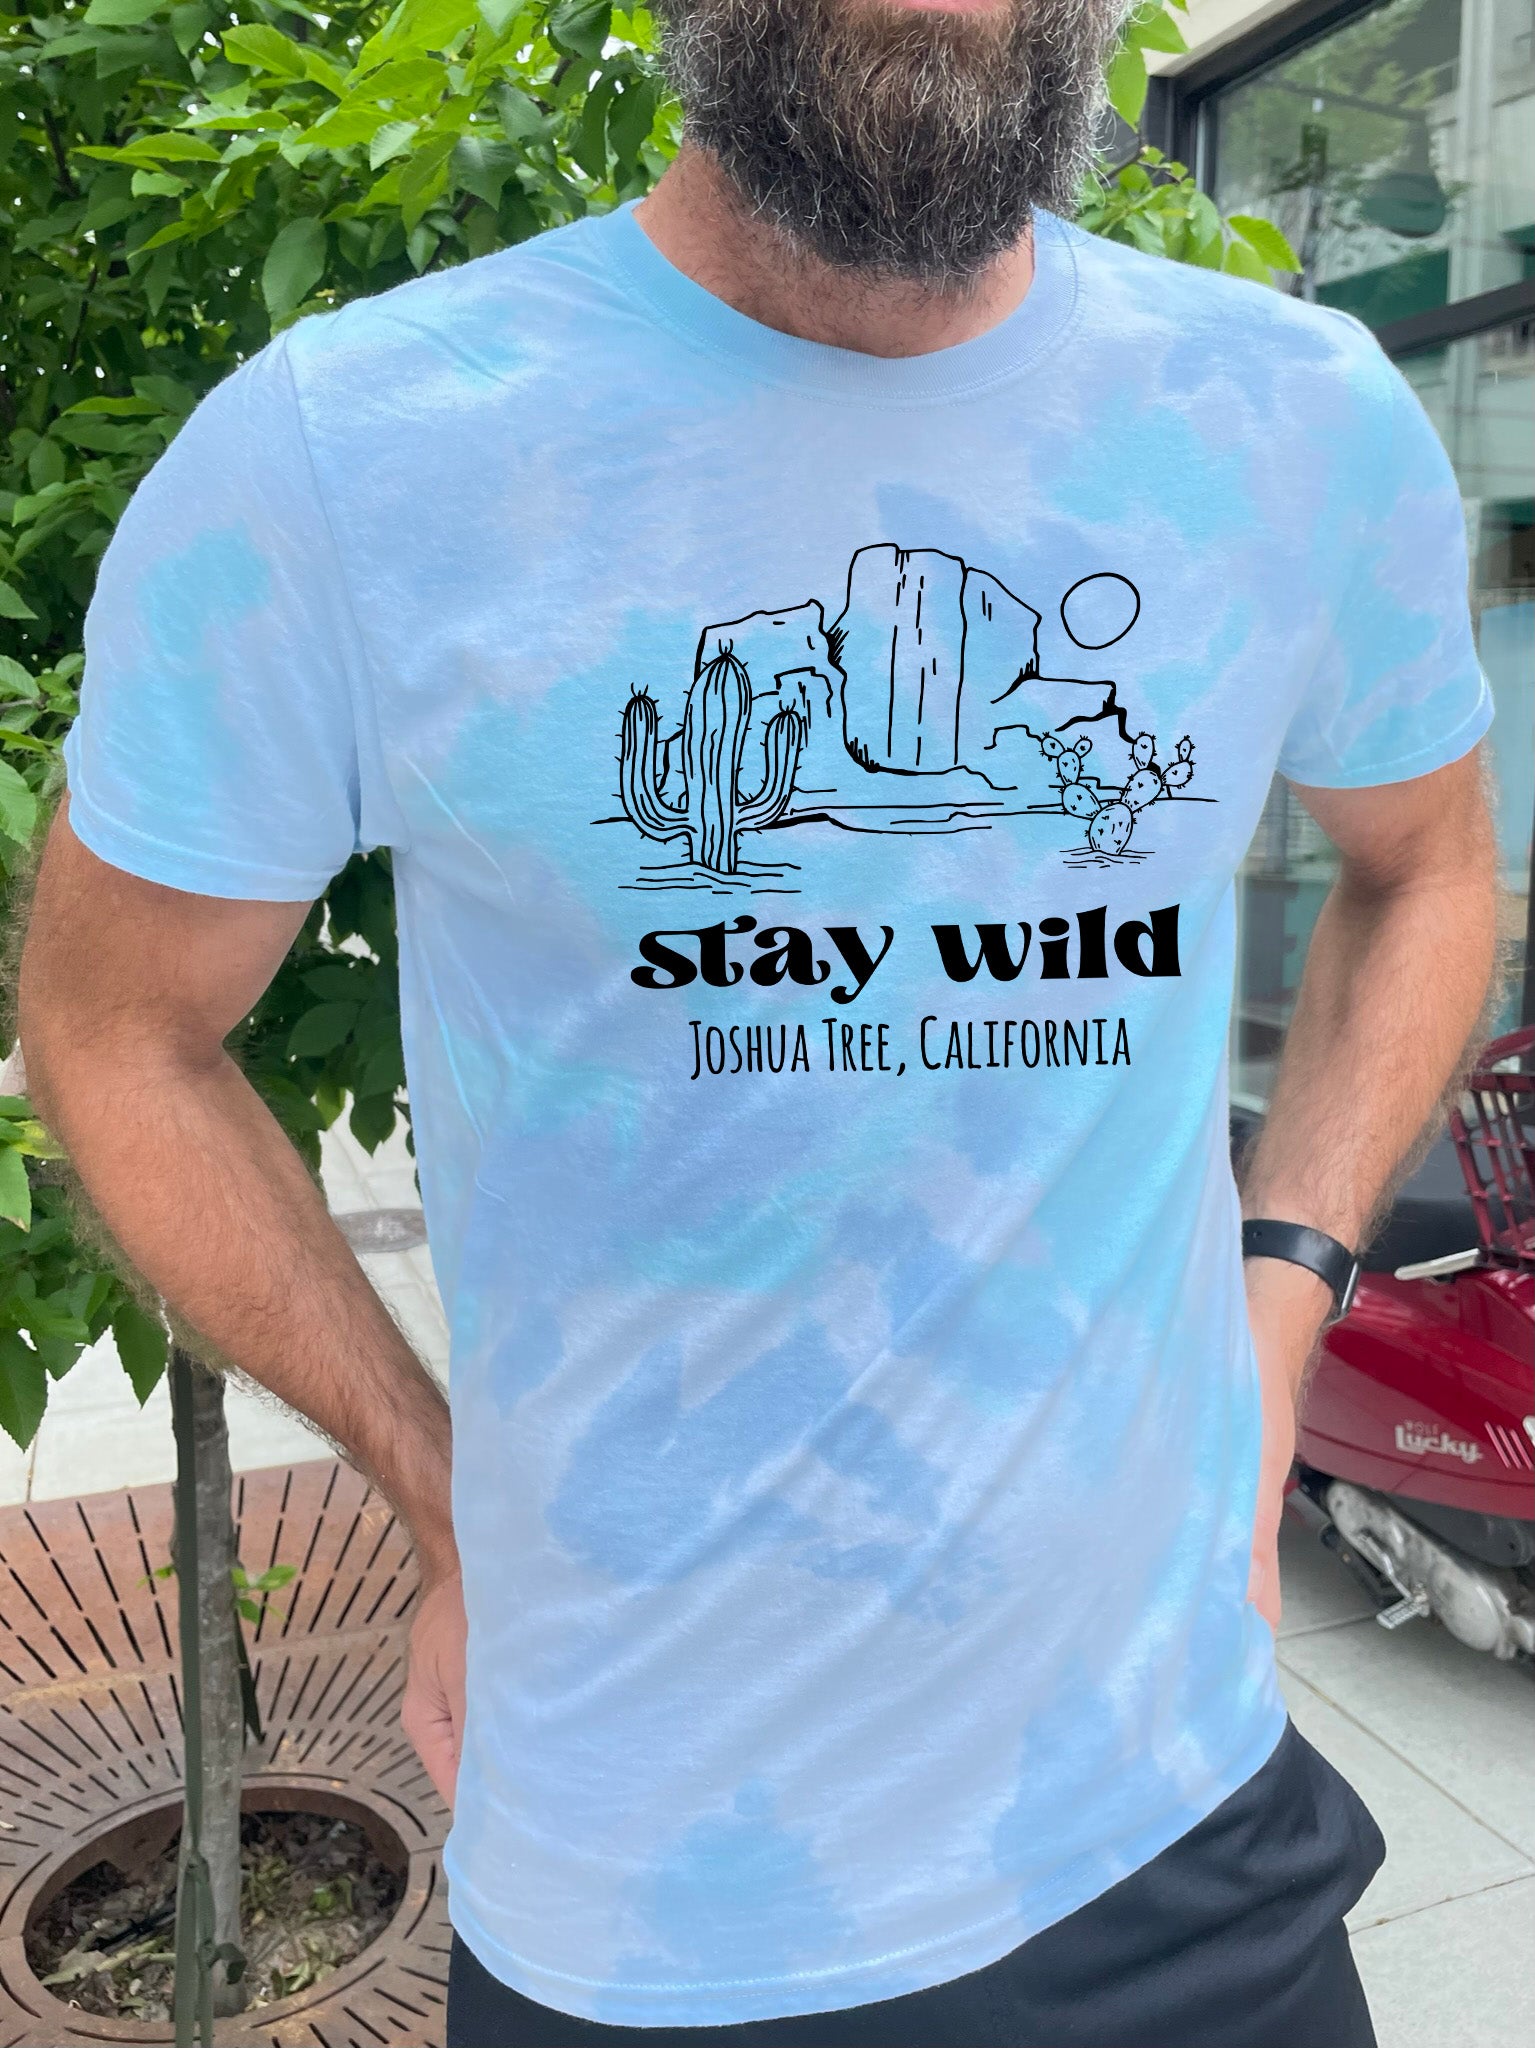 a man with a beard wearing a t - shirt that says stay wild